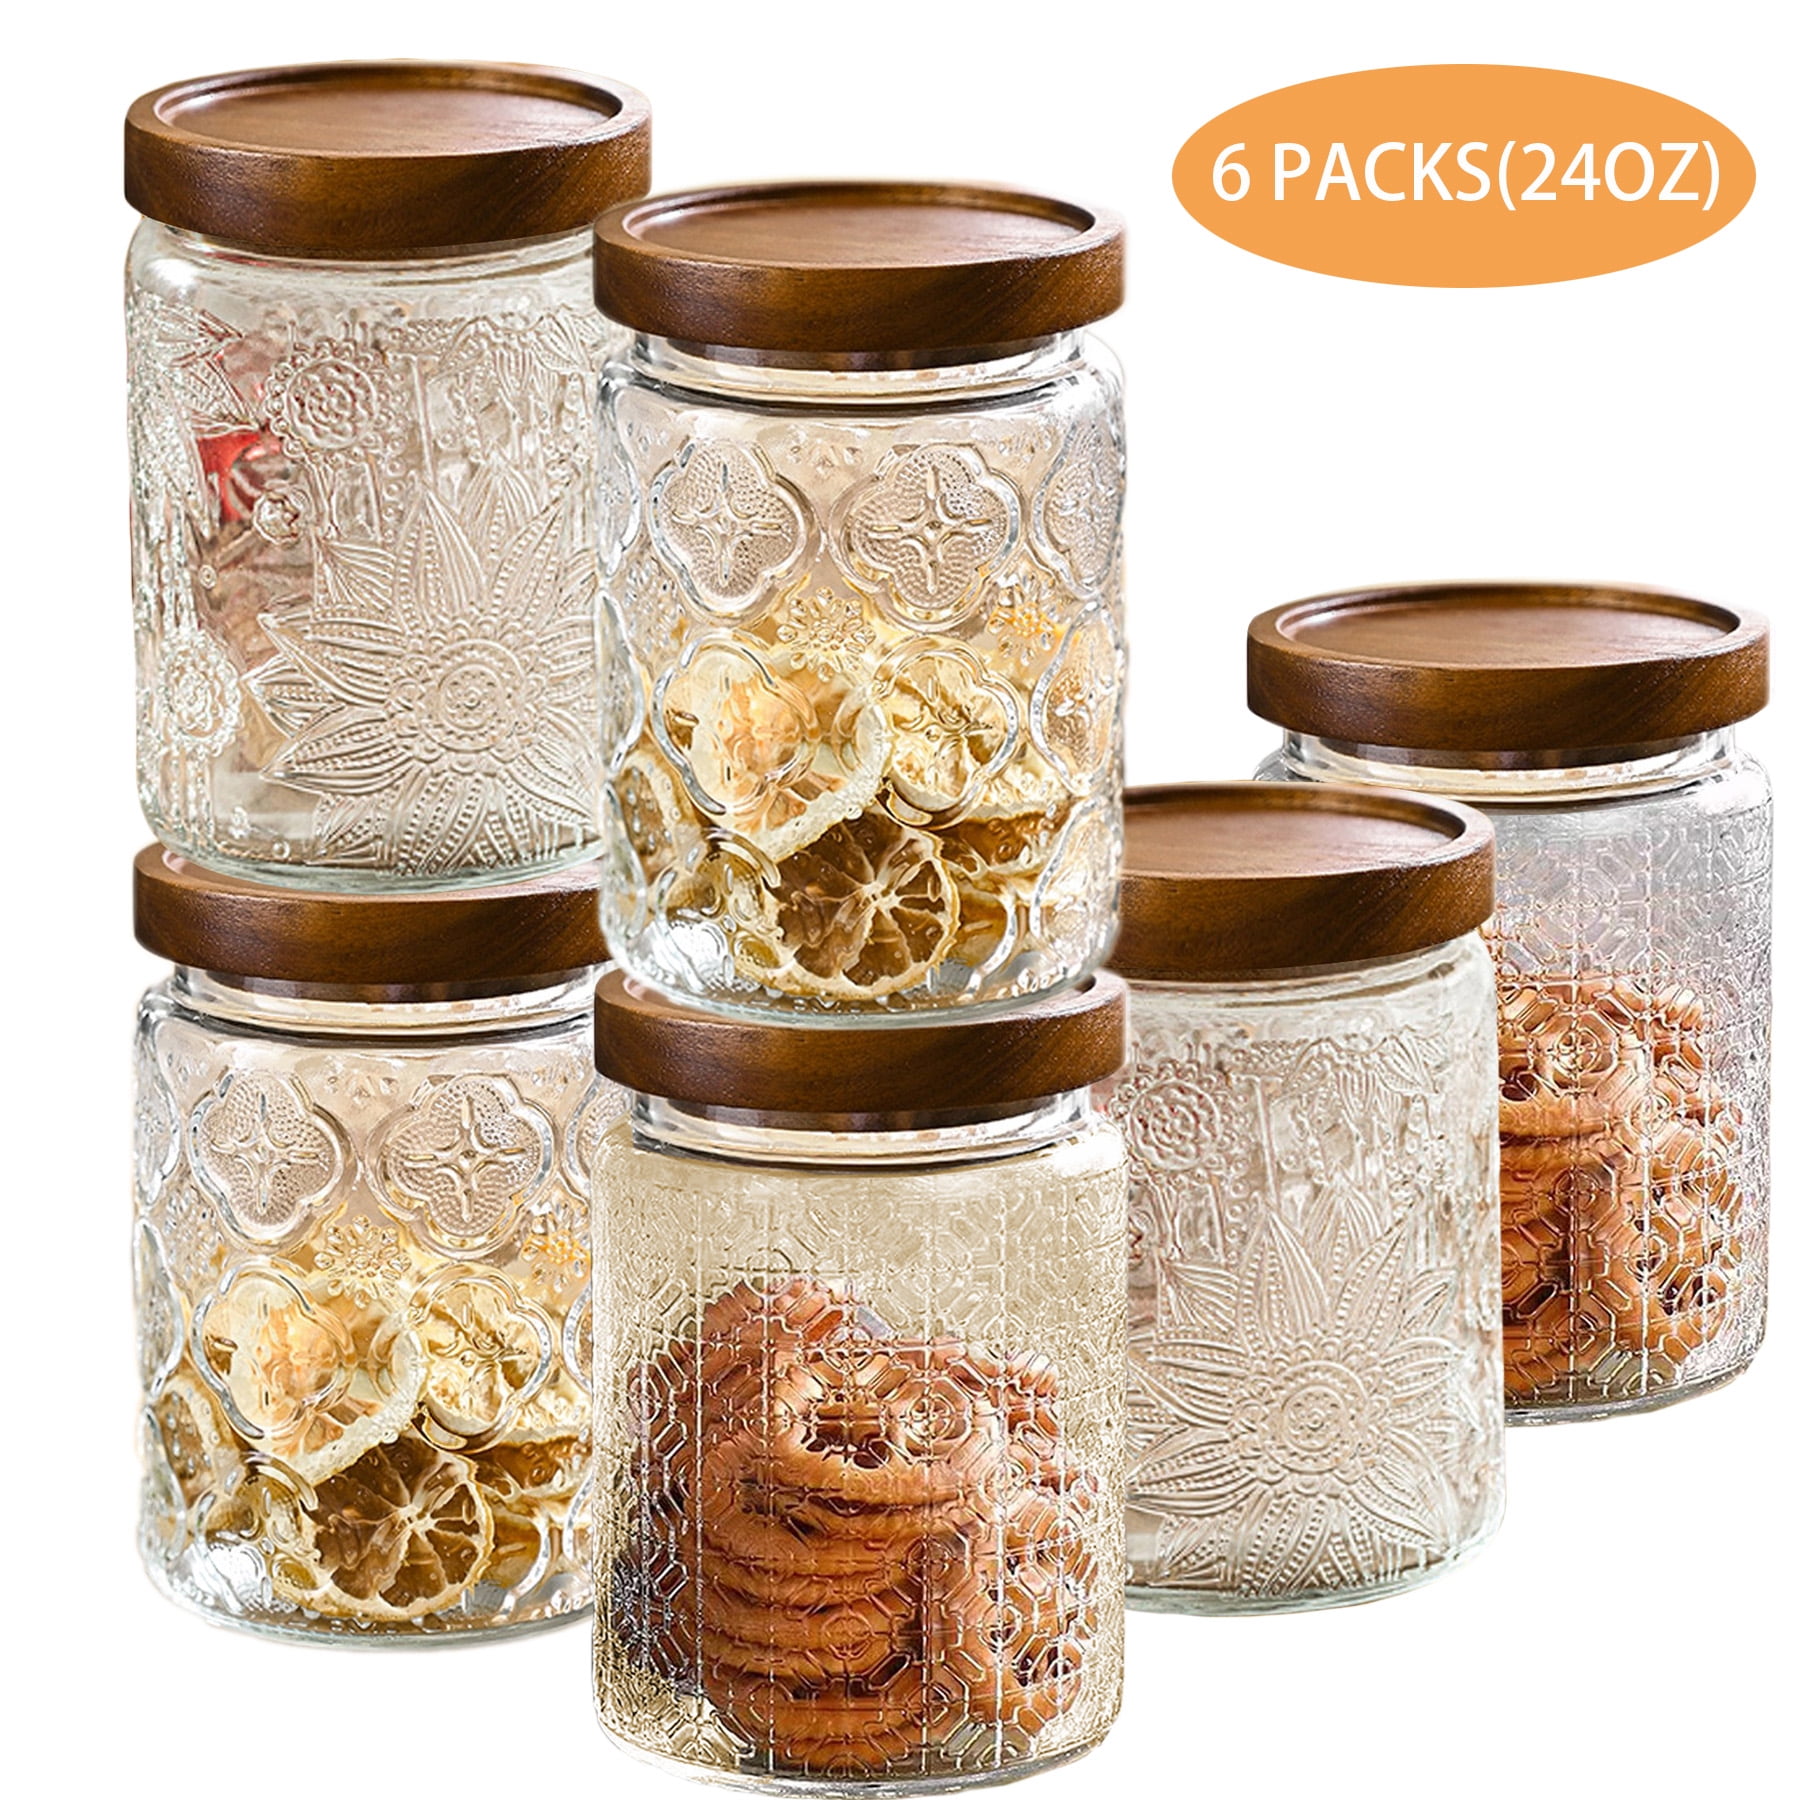 FORHVIPS 34 Oz/2 Pcs Empty Spice Jars Glass with Airtight Lid,Vintage Wide Mouth Mason Jars Sets for Food Storage containers,Sugar, Flour, Candy, Tea